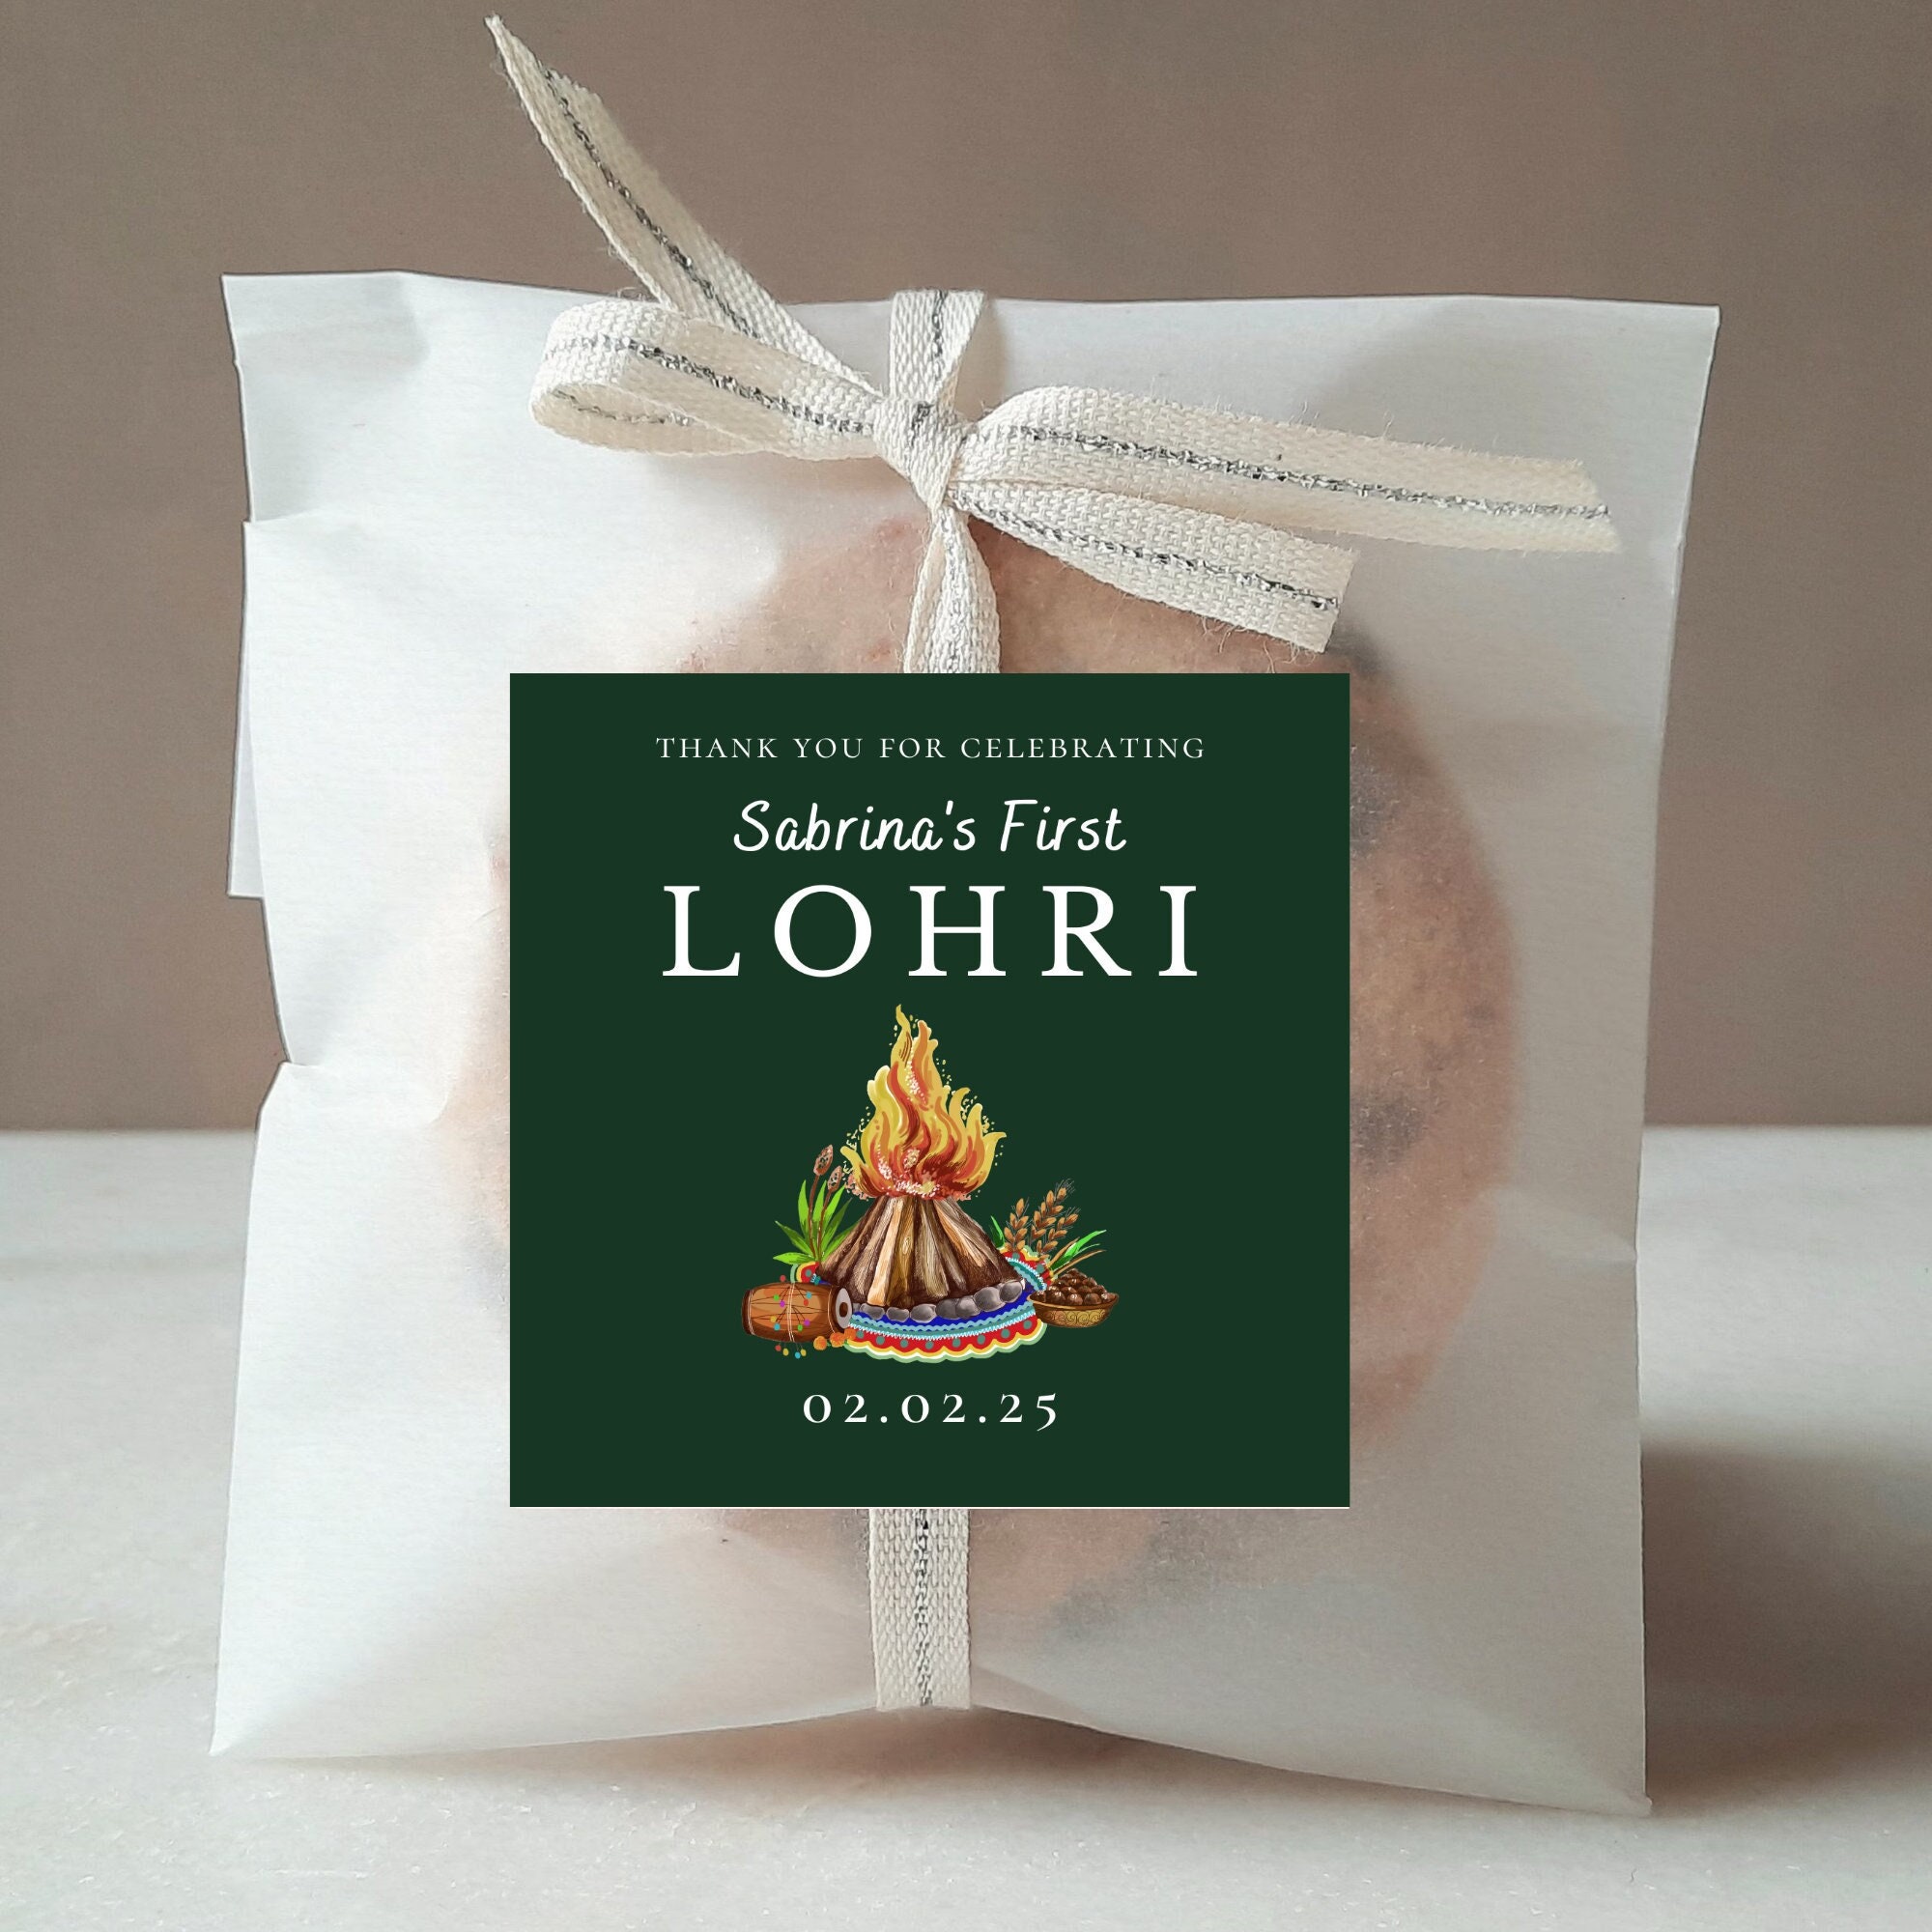 Lohri Gifts Ideas - Traditional and Modern - Indiagift